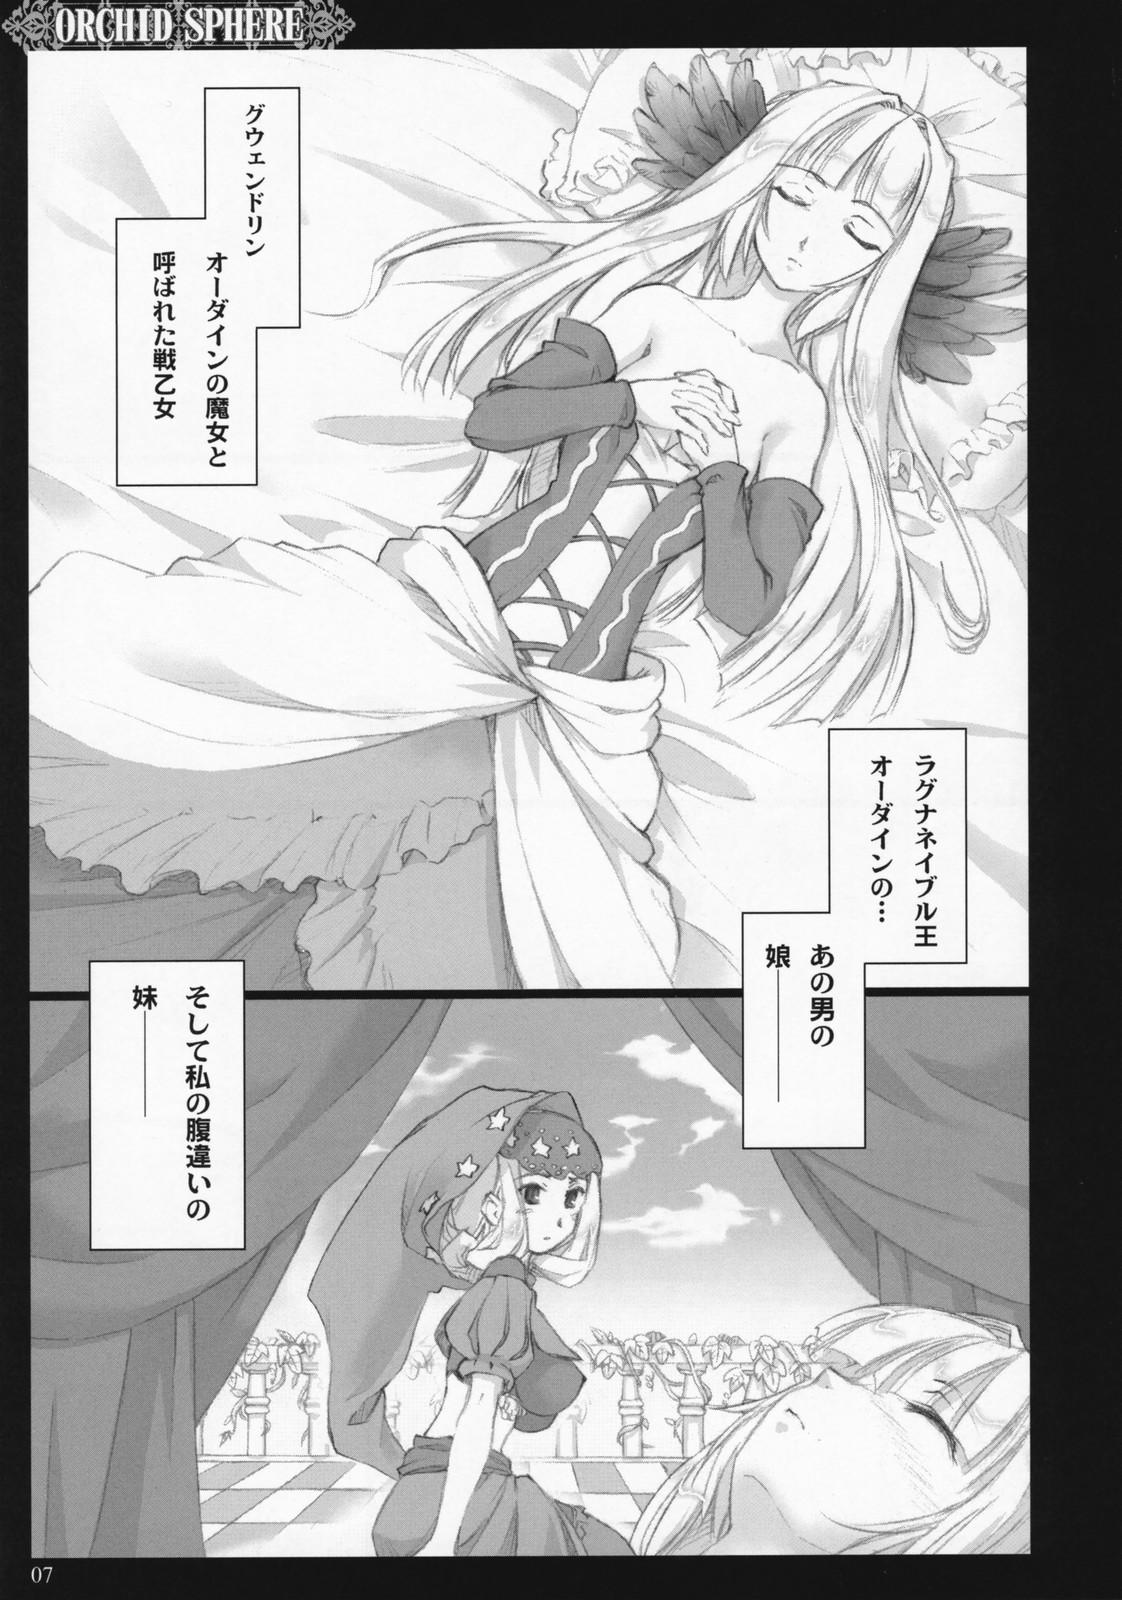 First Time Orchid Sphere - Odin sphere Gets - Page 6